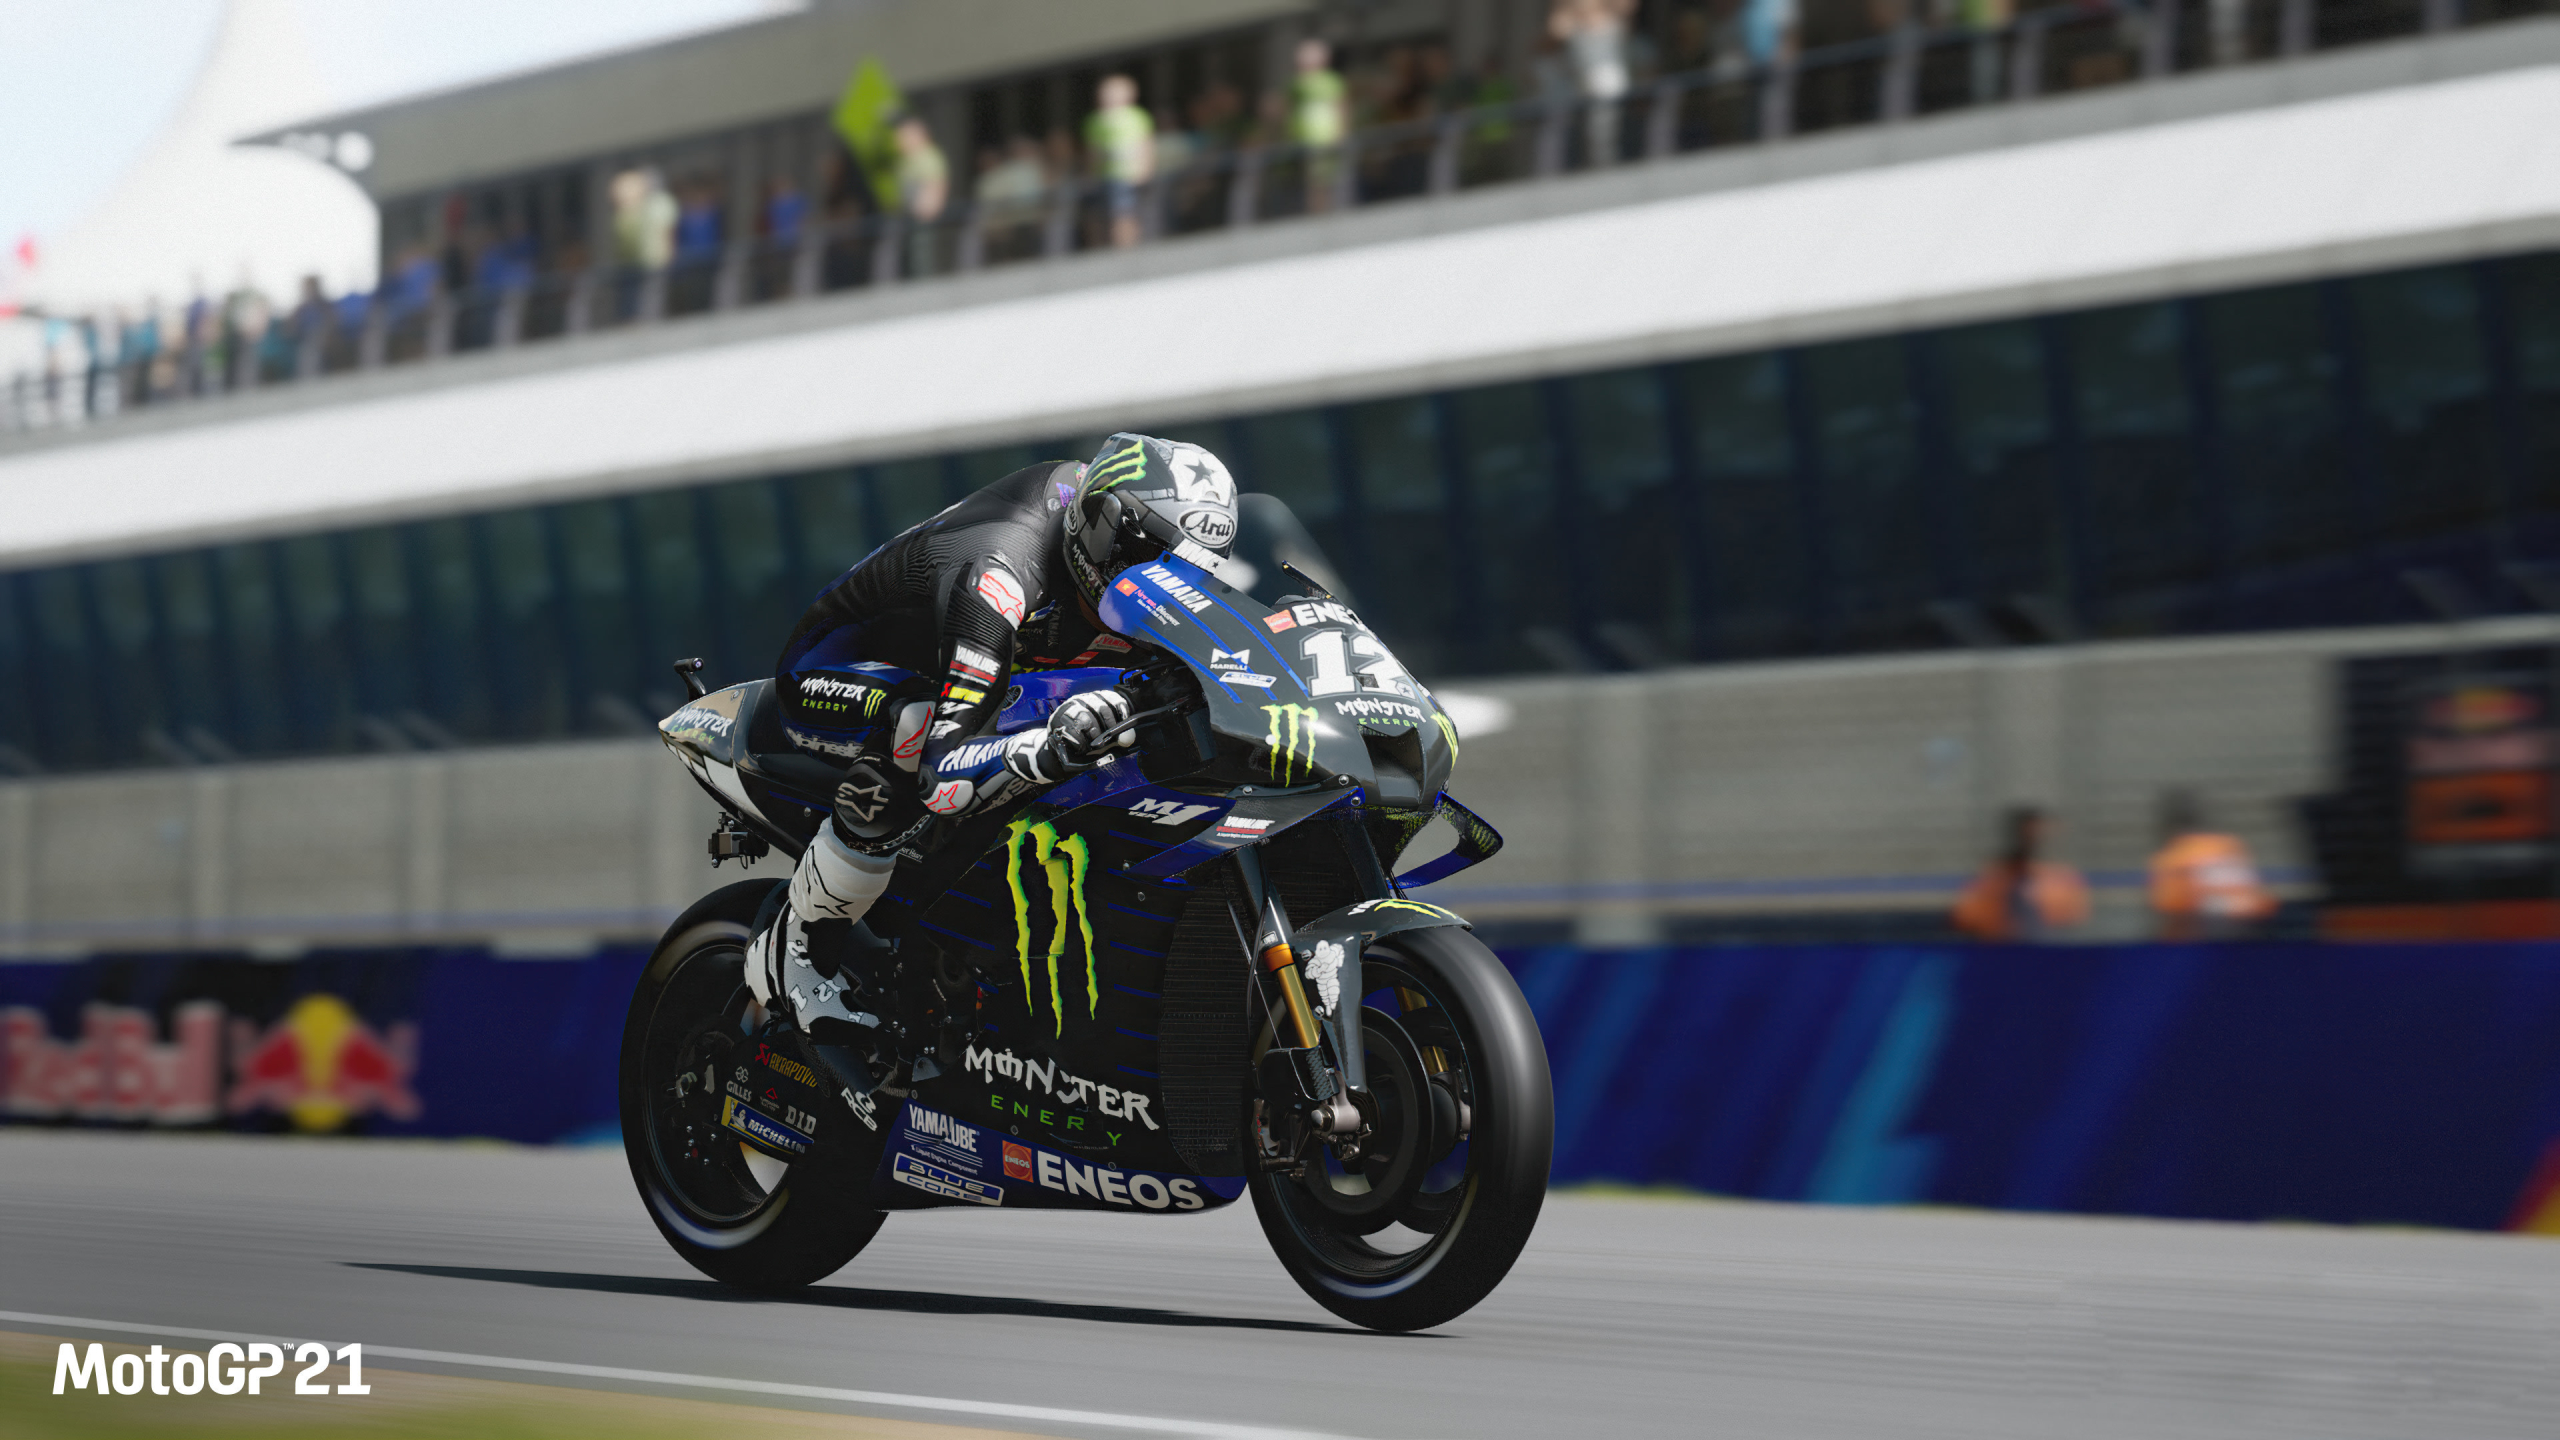 2560x1440 Black Bike Motogp 21 1440p Resolution Wallpaper Hd Games 4k Wallpapers Images Photos And Background